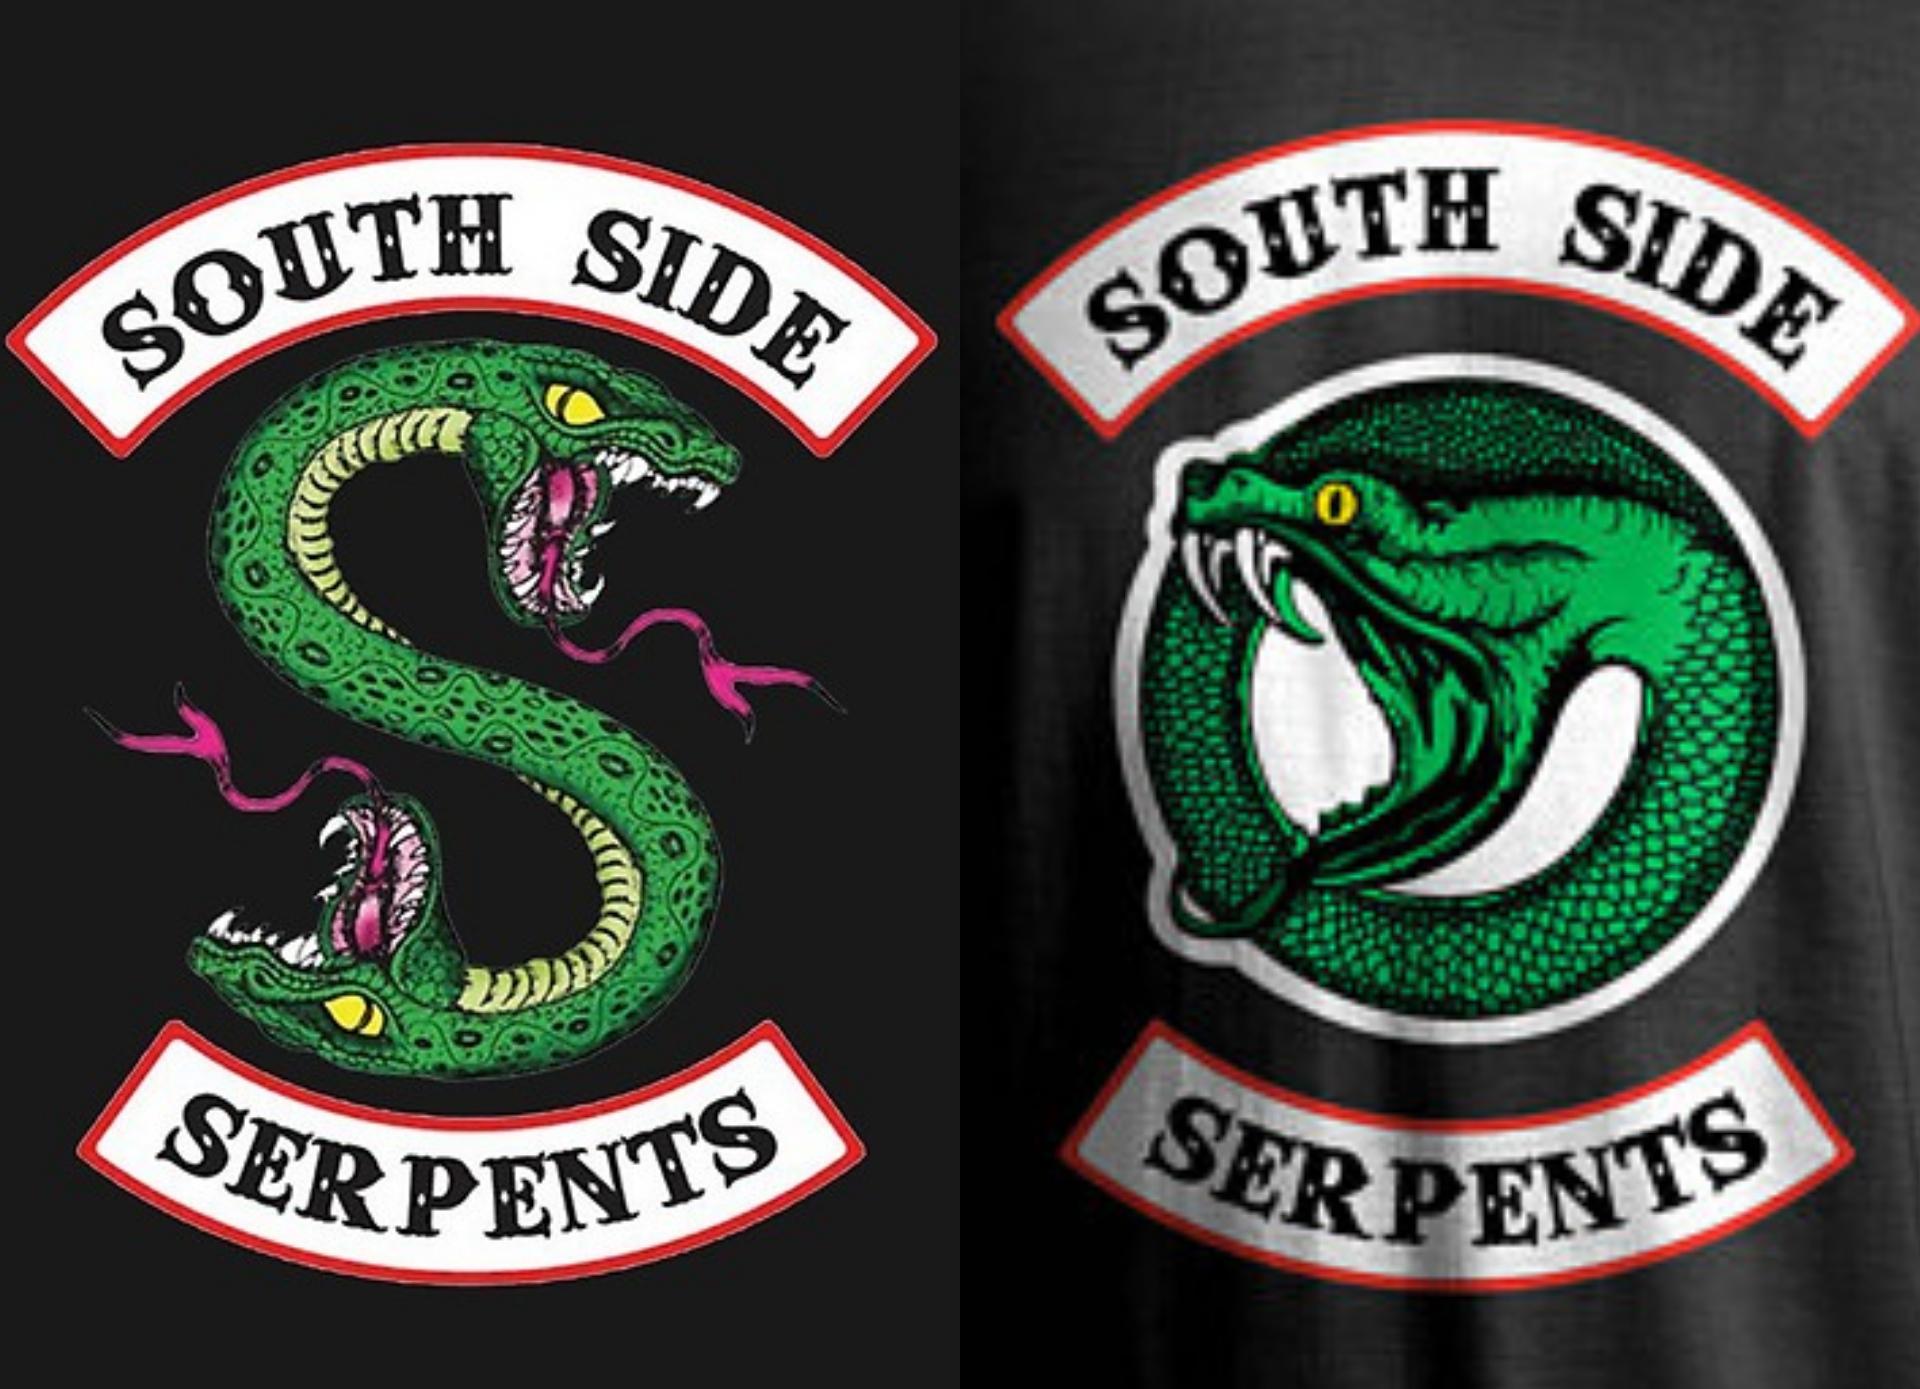 Serpent Logo - What's up with the logo change? All the serpents now have the new on ...